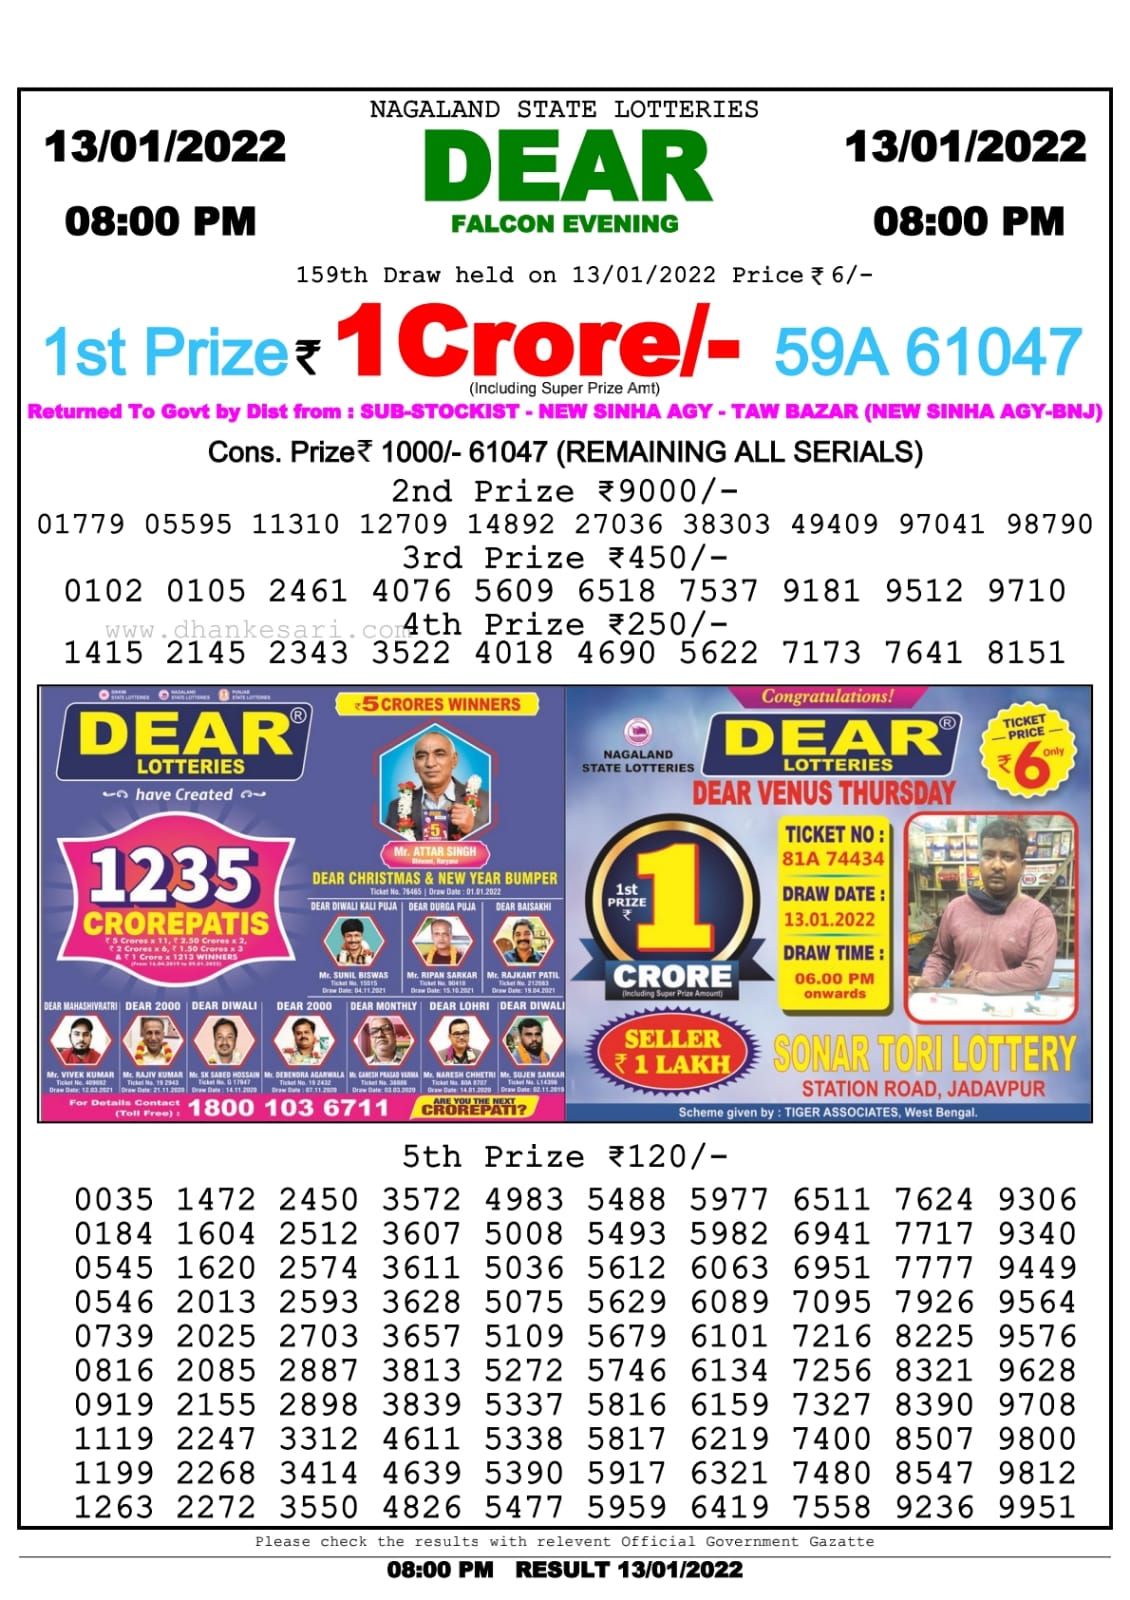 Dear Lottery Nagaland state Lottery Results 8.00 PM 13/01/2022